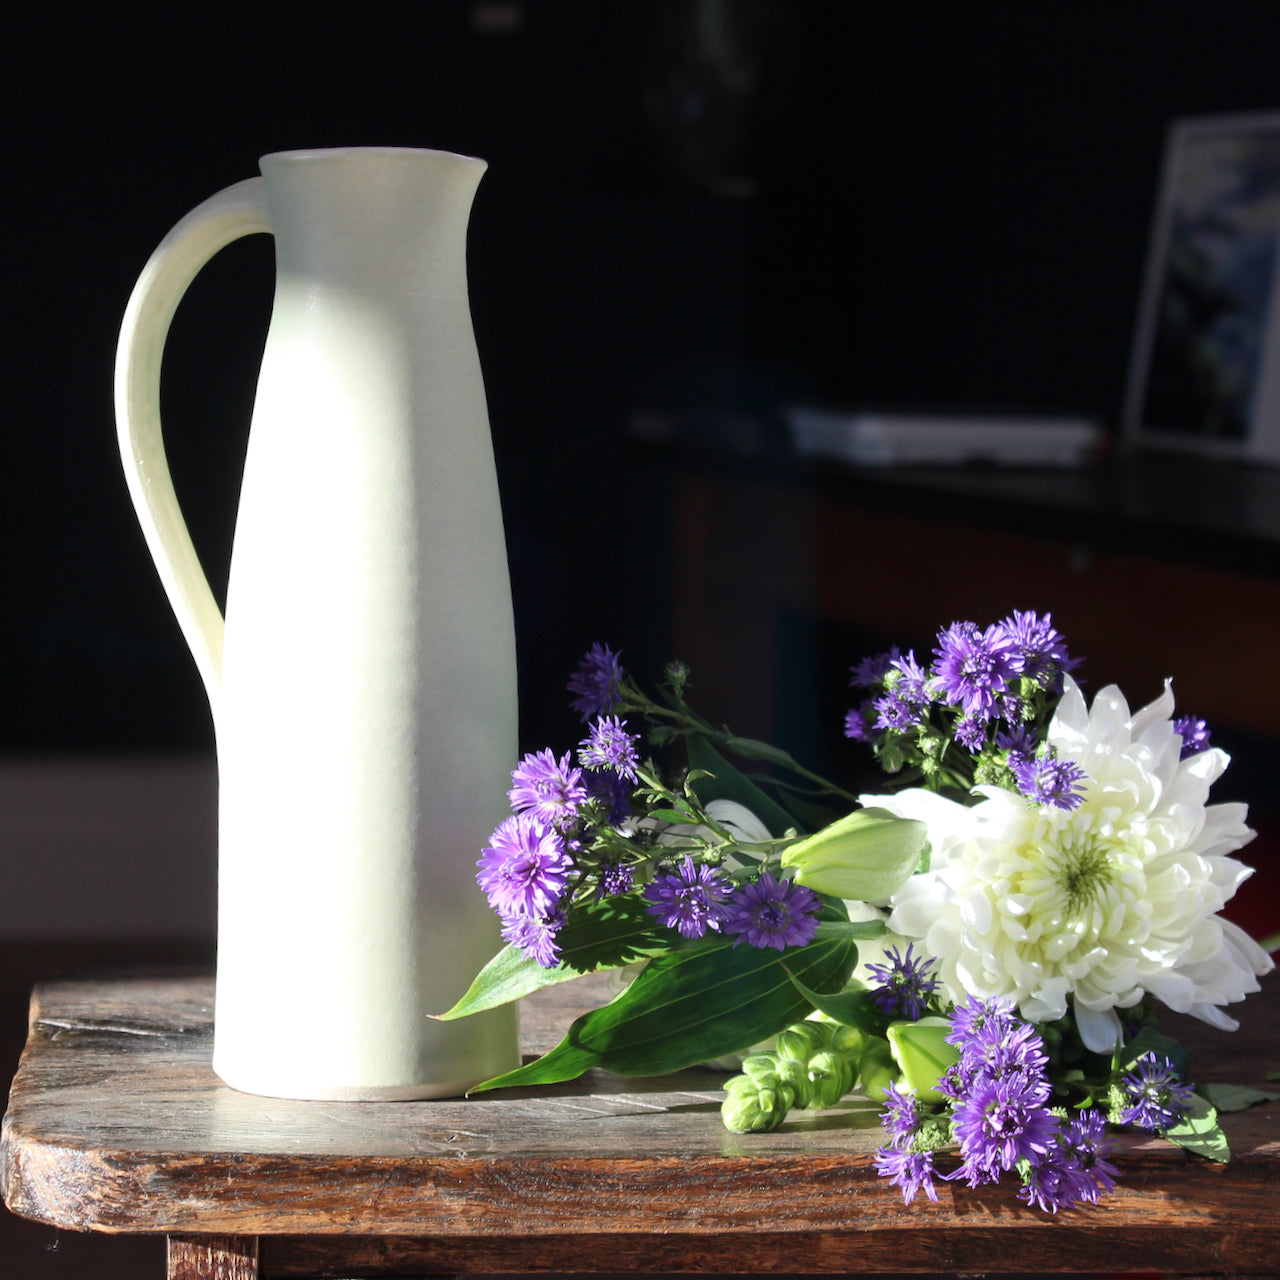 pale olive ceramic jug by UK ceramicist Lucy Burley with a bunch of white and purple flowers lying beside it 